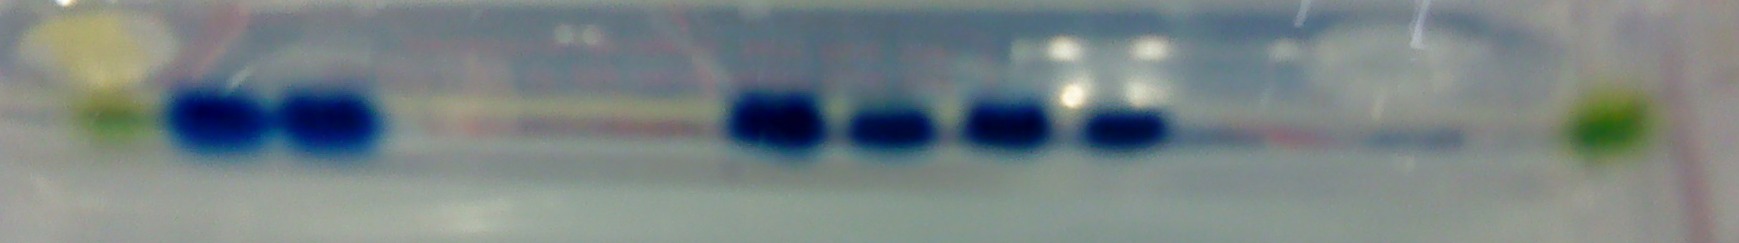 The gel loaded up with the amplified PCR products (blue) and the ladders on either side (green), carried out to check the size of the sequences. Please see results section below for key.